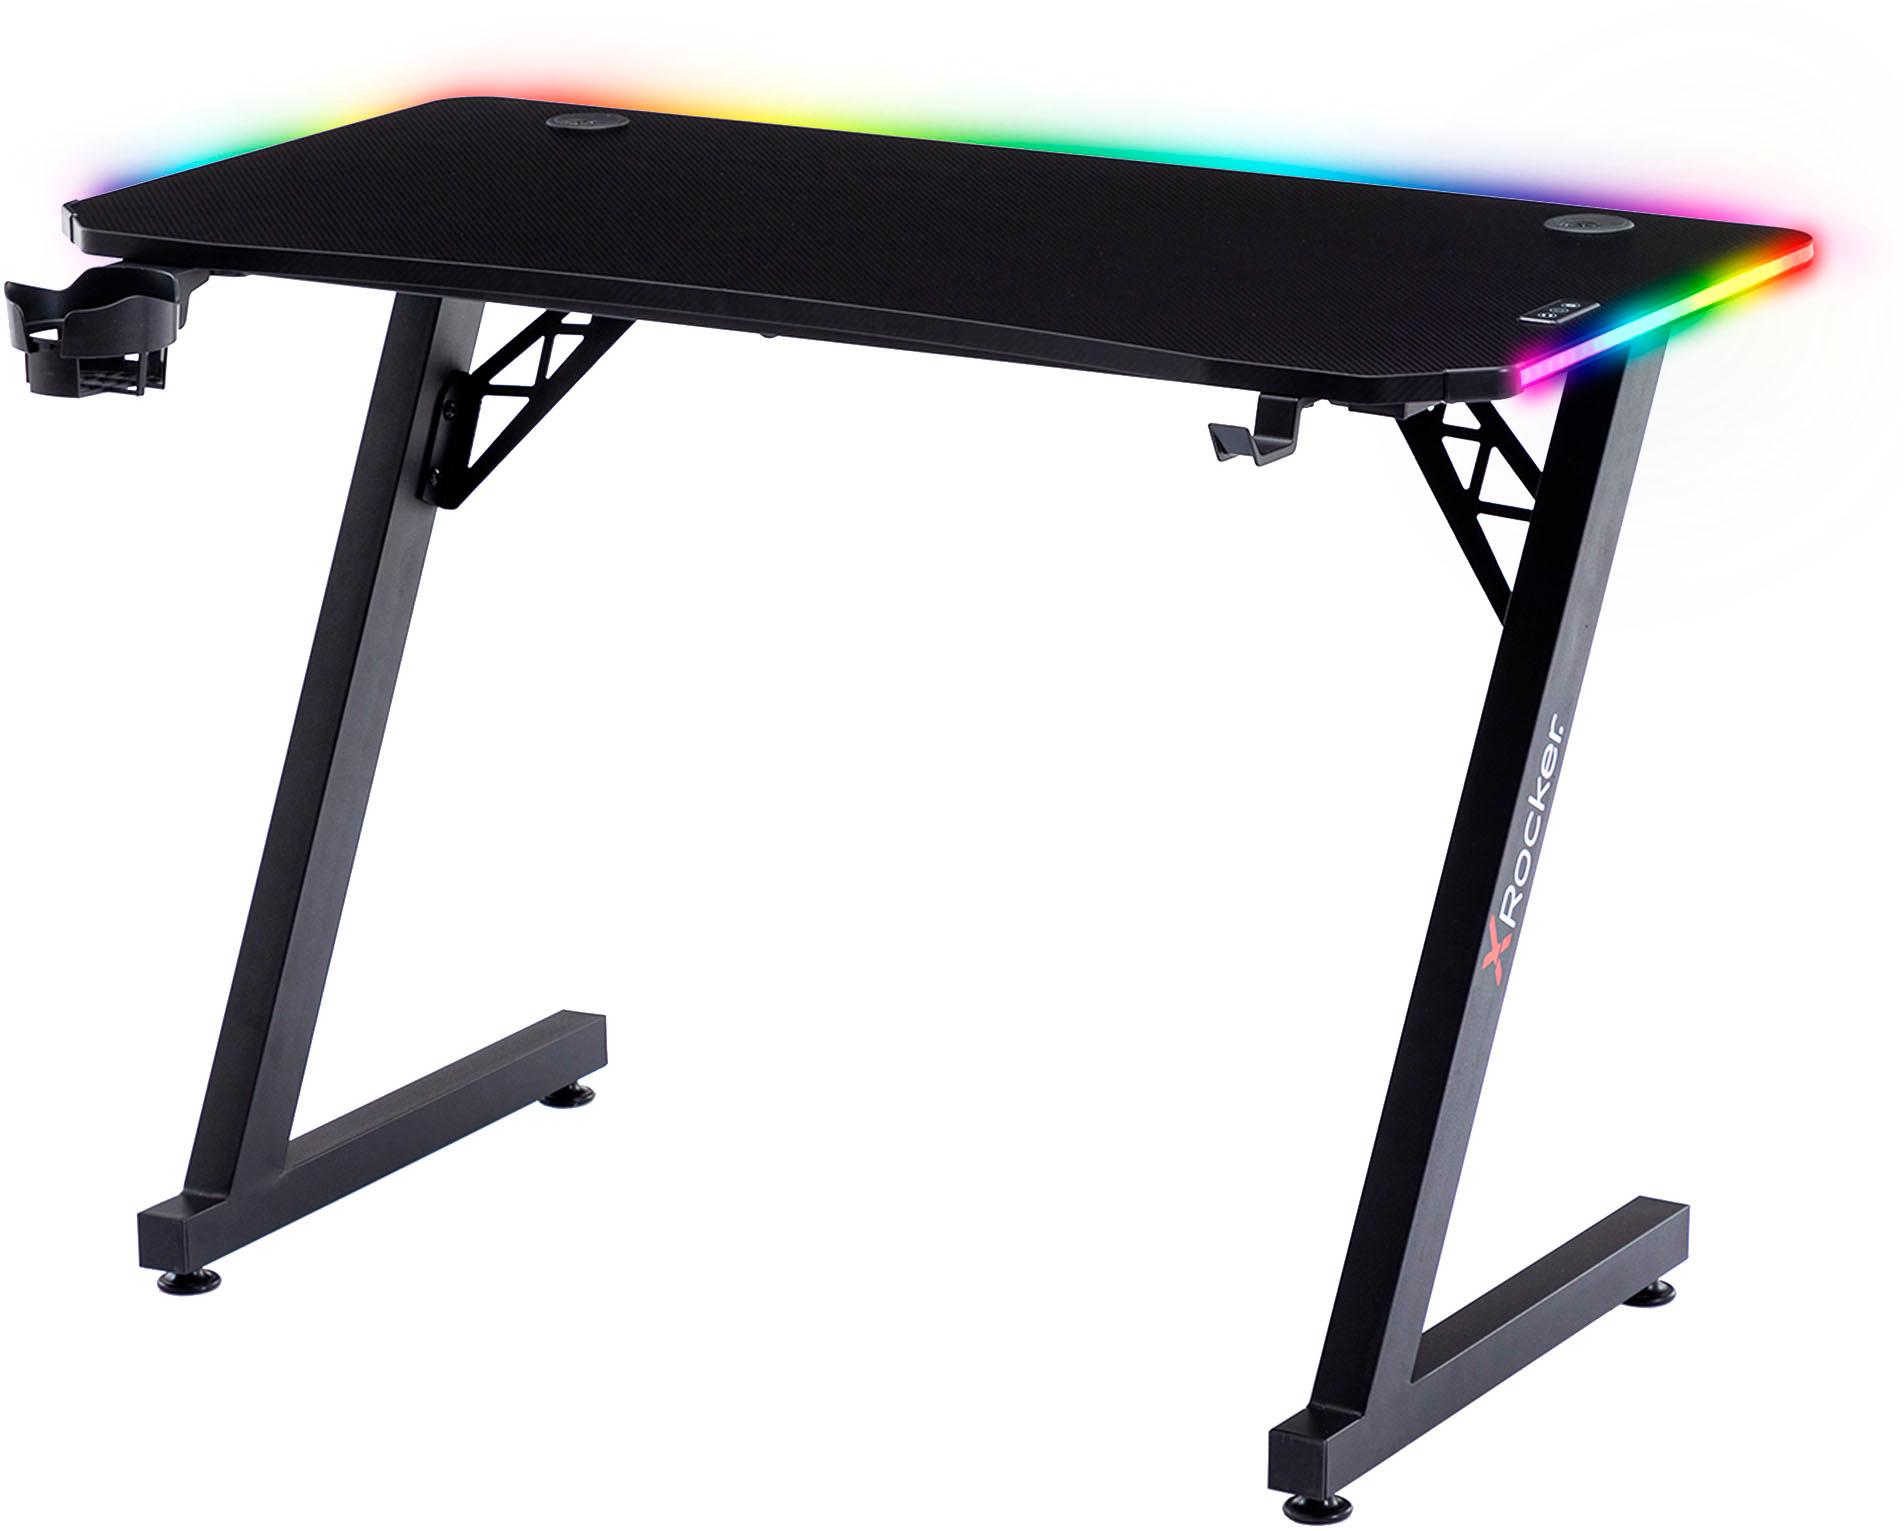 Gaming PC Table Desk With LED lights for sale in Co. Dublin for €129 on  DoneDeal